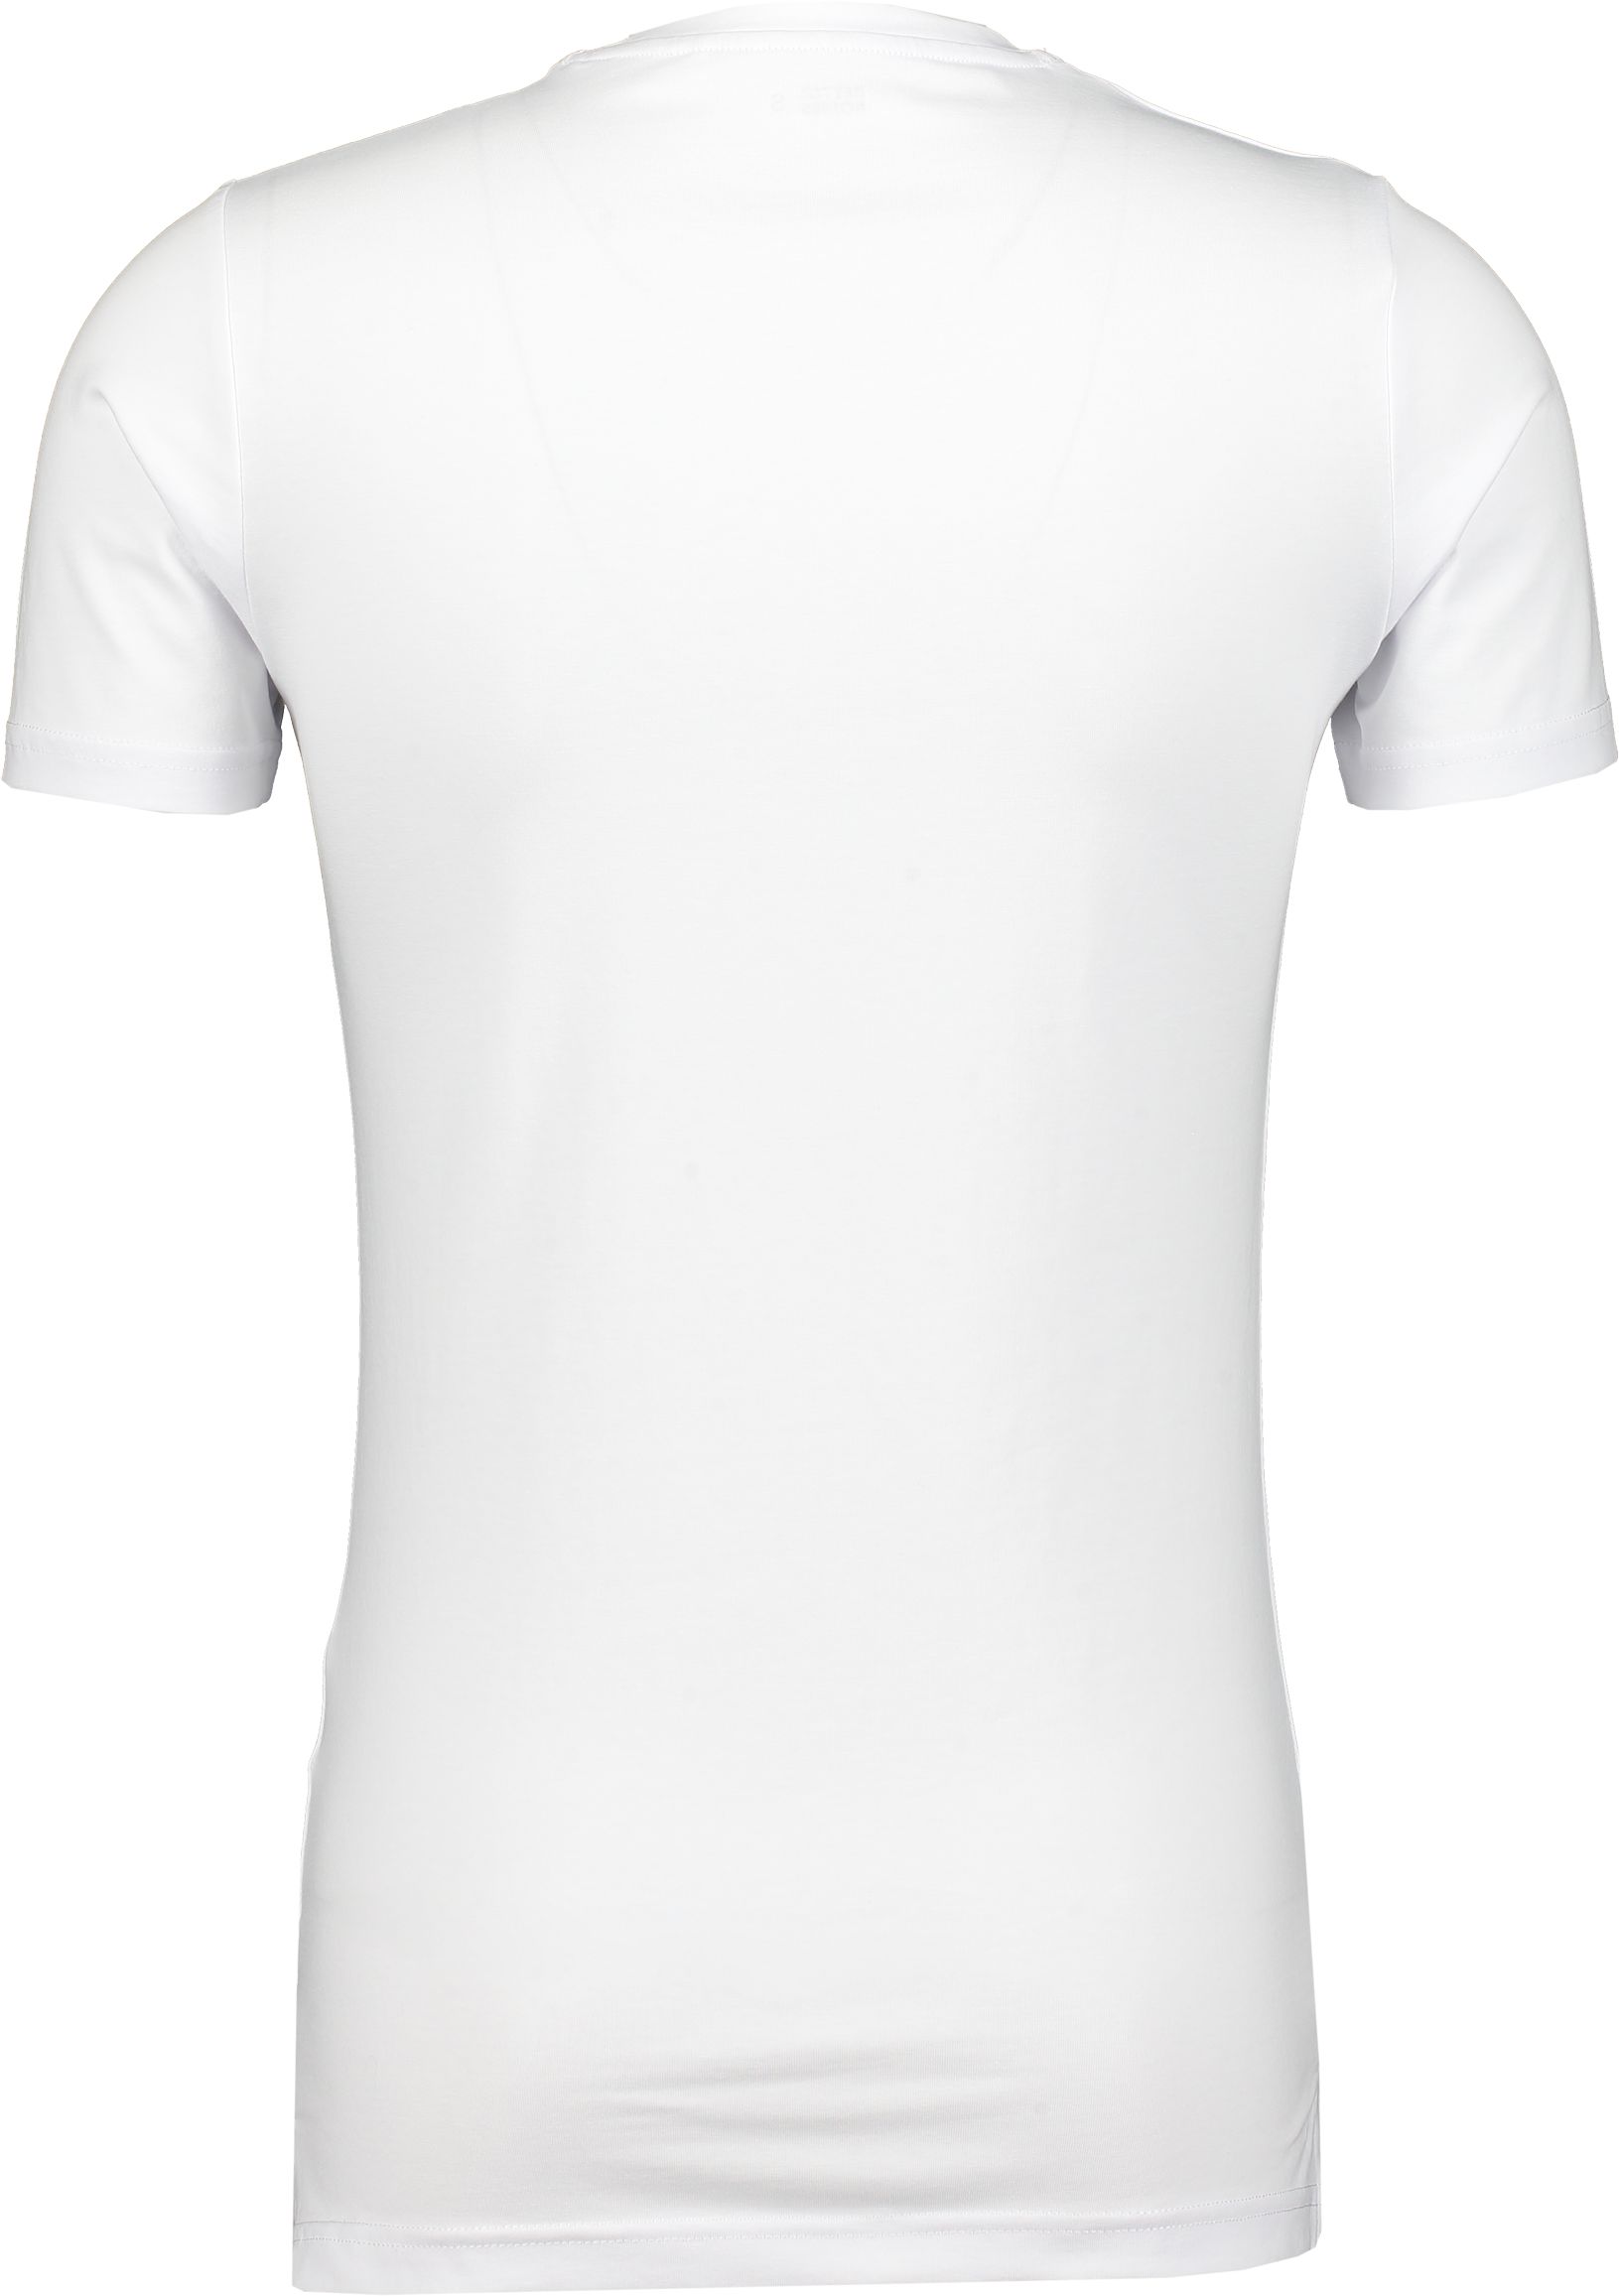 BETTER BODIES, M ESSENTIAL TAPERED TEE